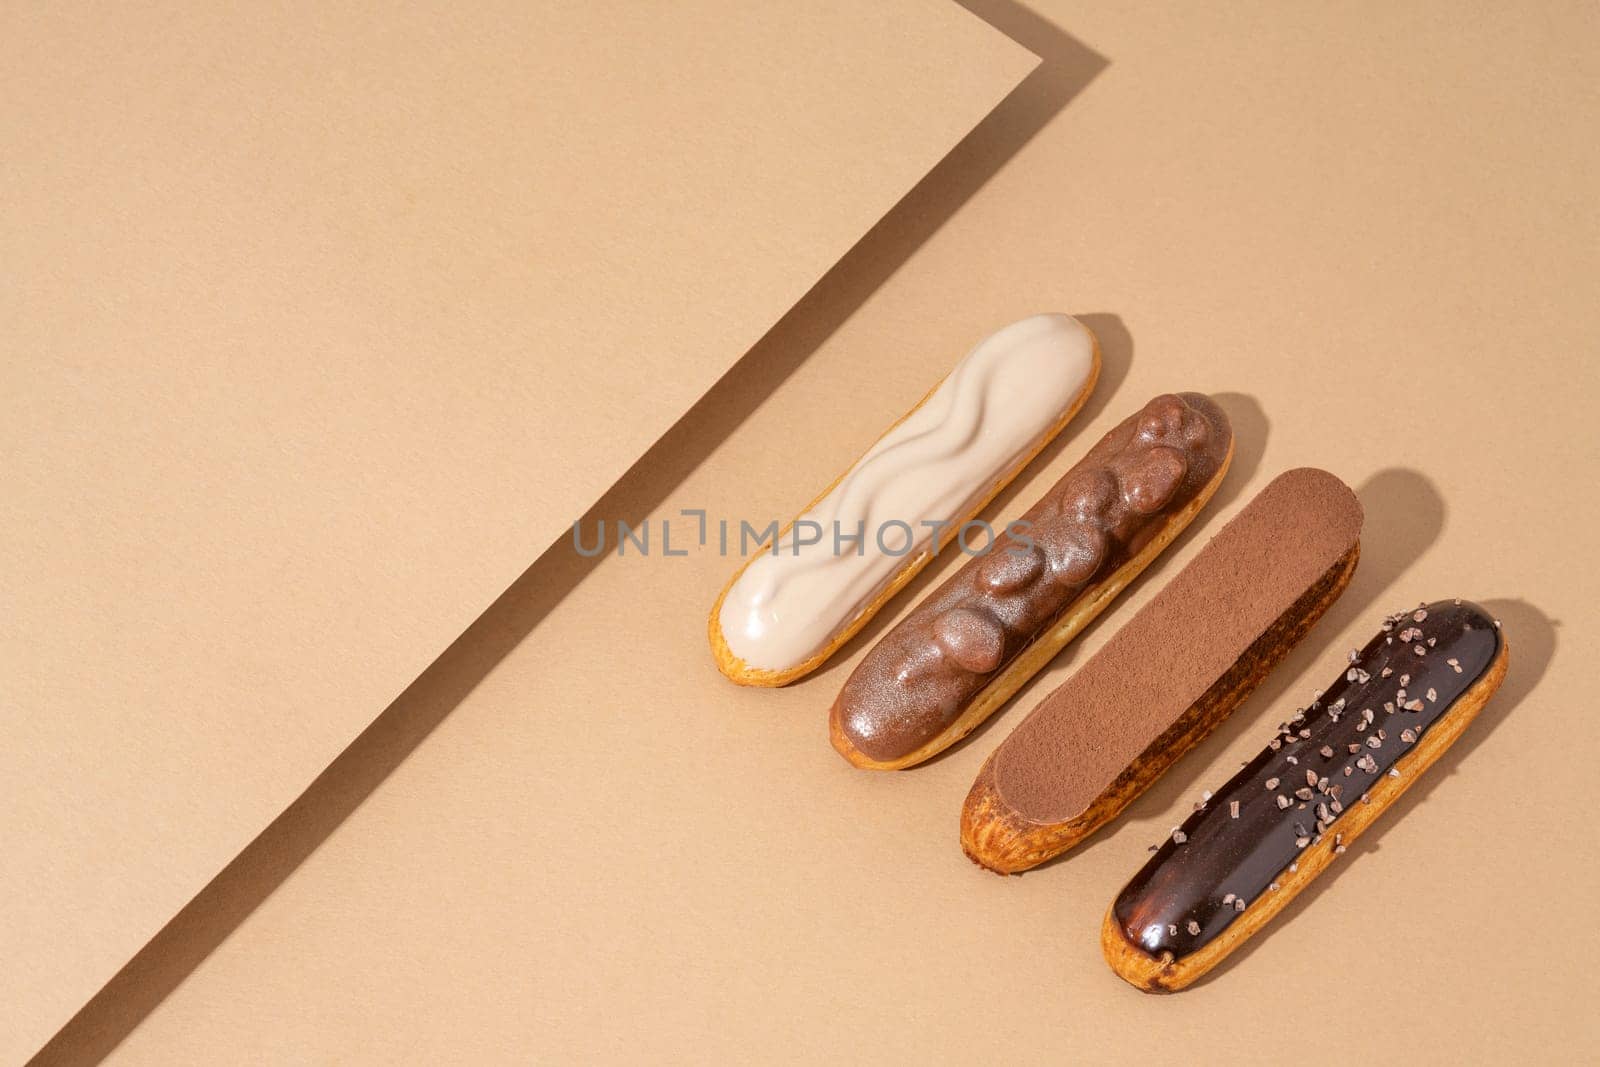 A set of delicious glazed donuts in a variety of flavors, arranged on a cardboard paper in an inviting display